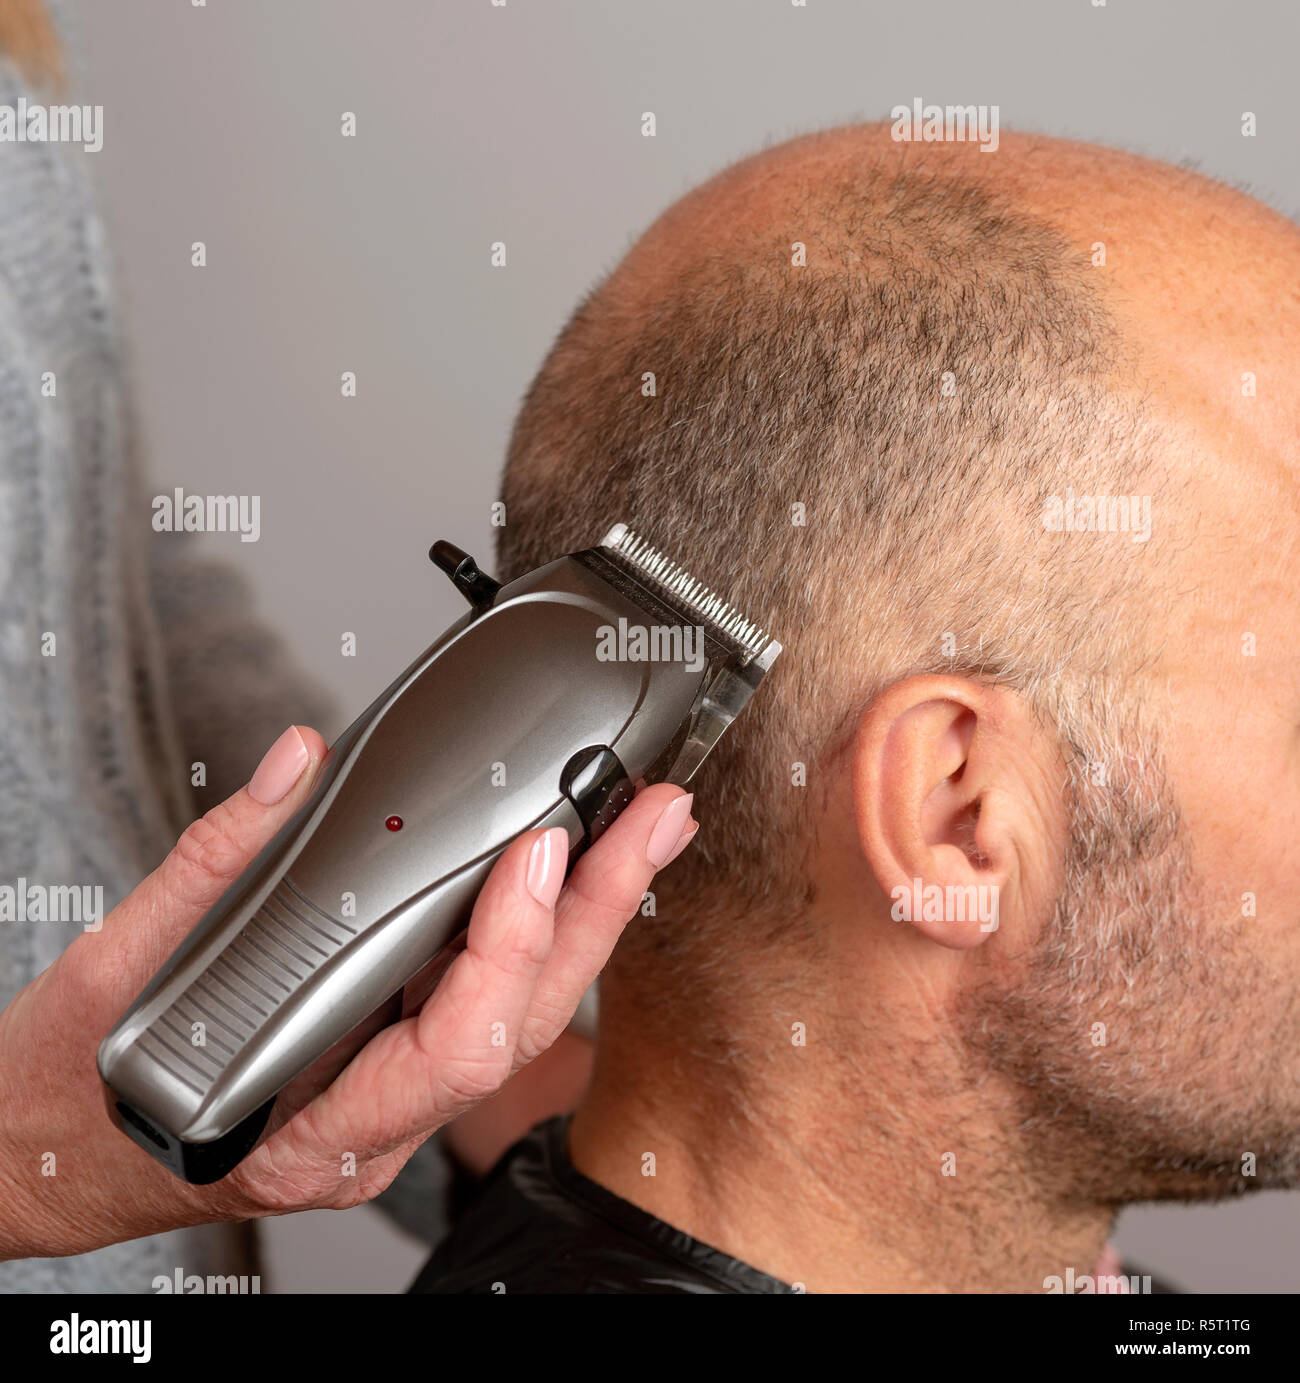 cutting hair with electric clippers